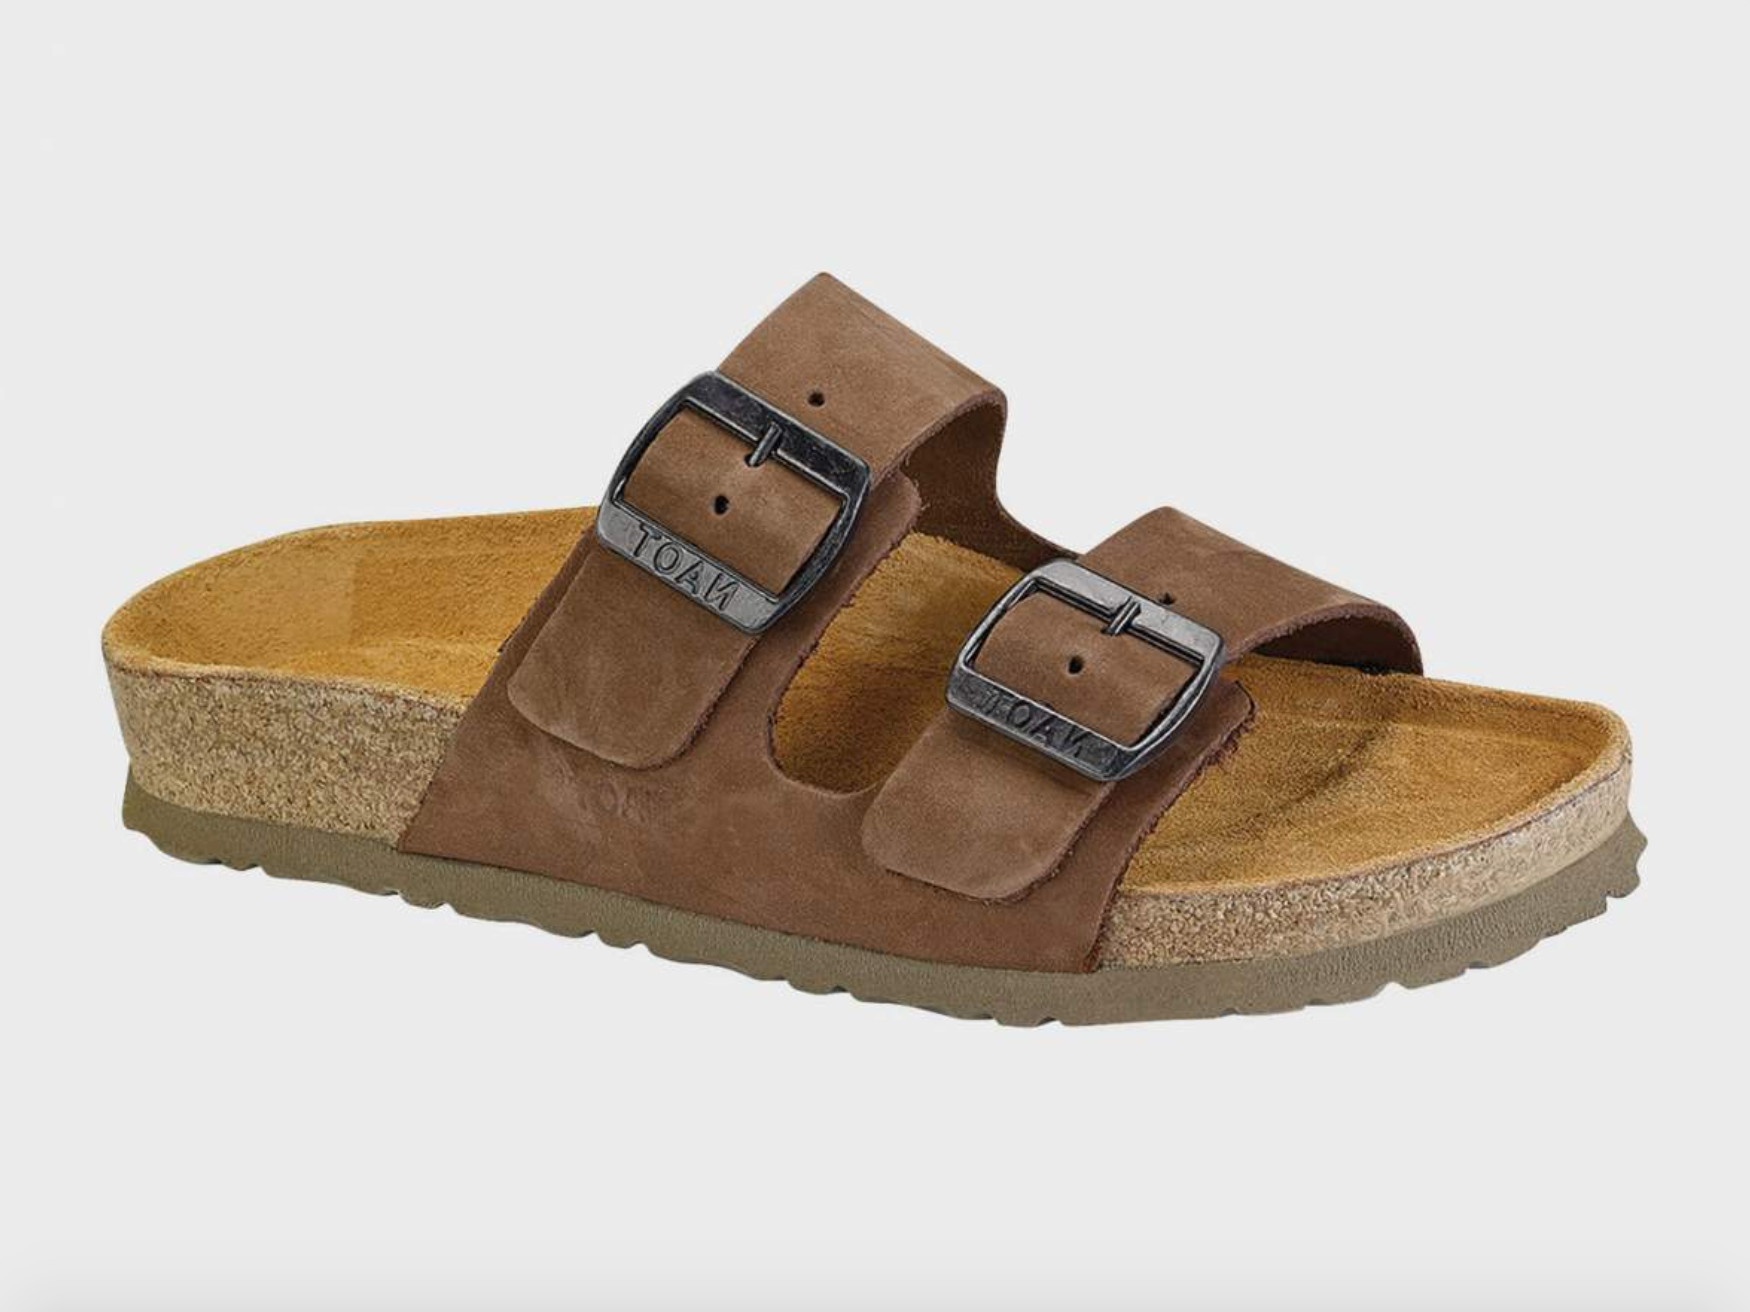 The sandals with brown leather straps and buckles